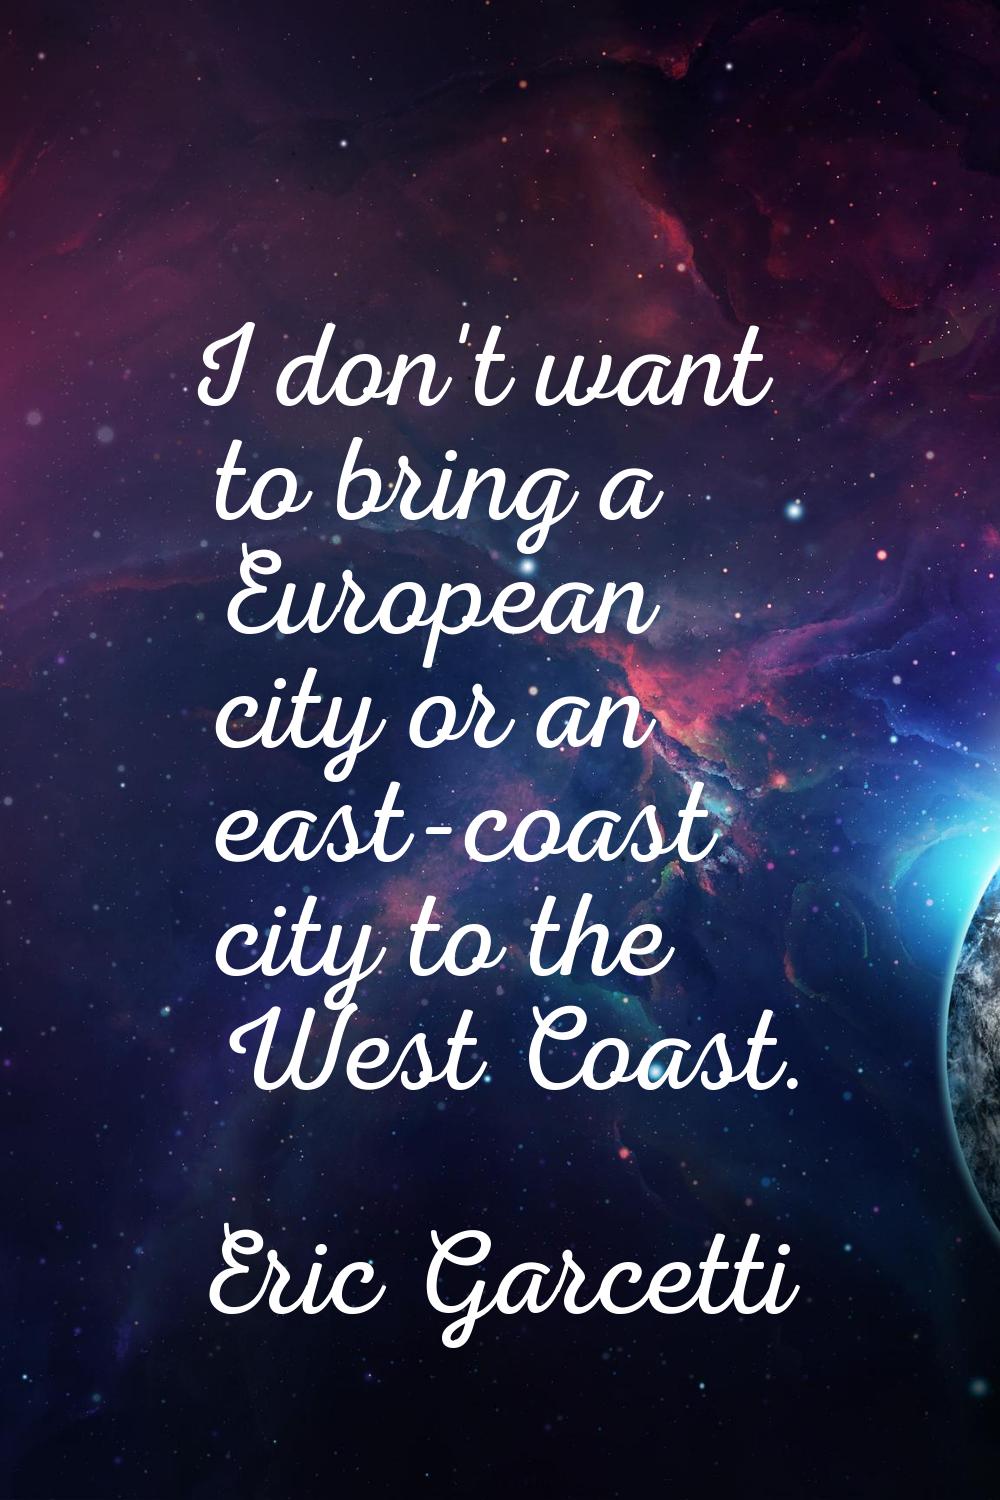 I don't want to bring a European city or an east-coast city to the West Coast.